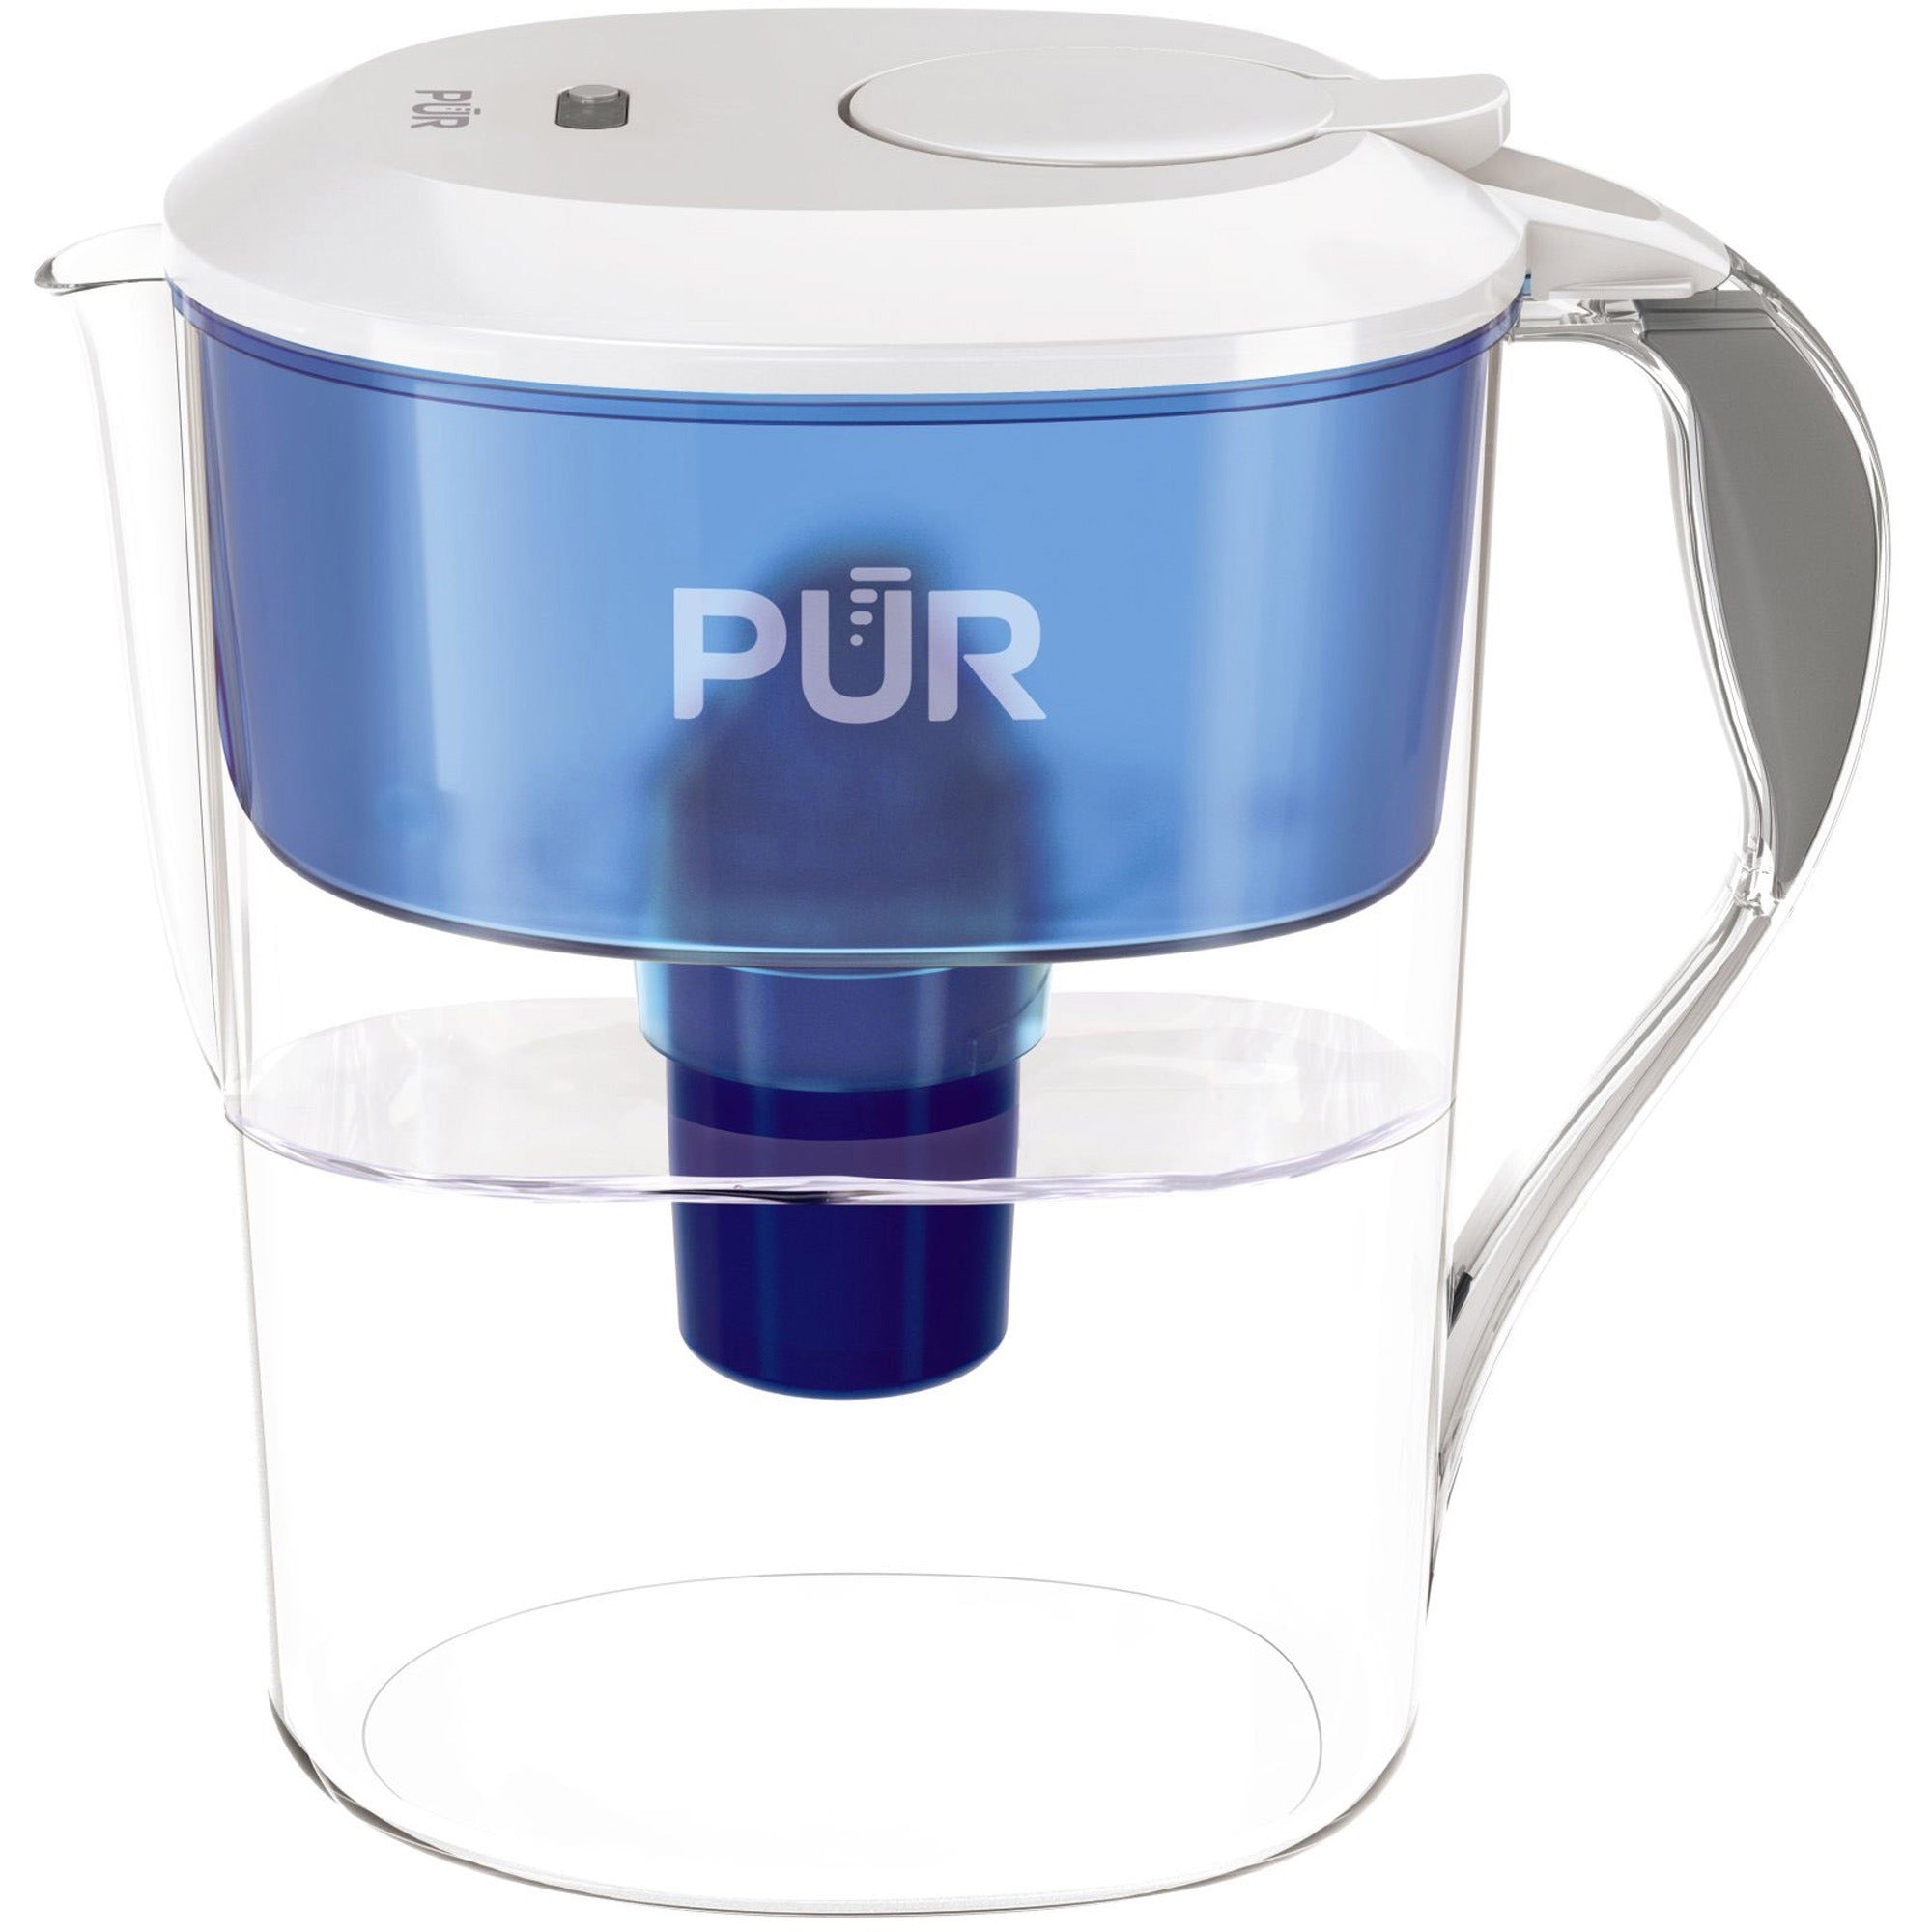 Pur 11 Cup Water Filtration Pitcher - Pitcher - 40 gal Filter Life (Water Capacity) - 1 Each - Blue, White - 